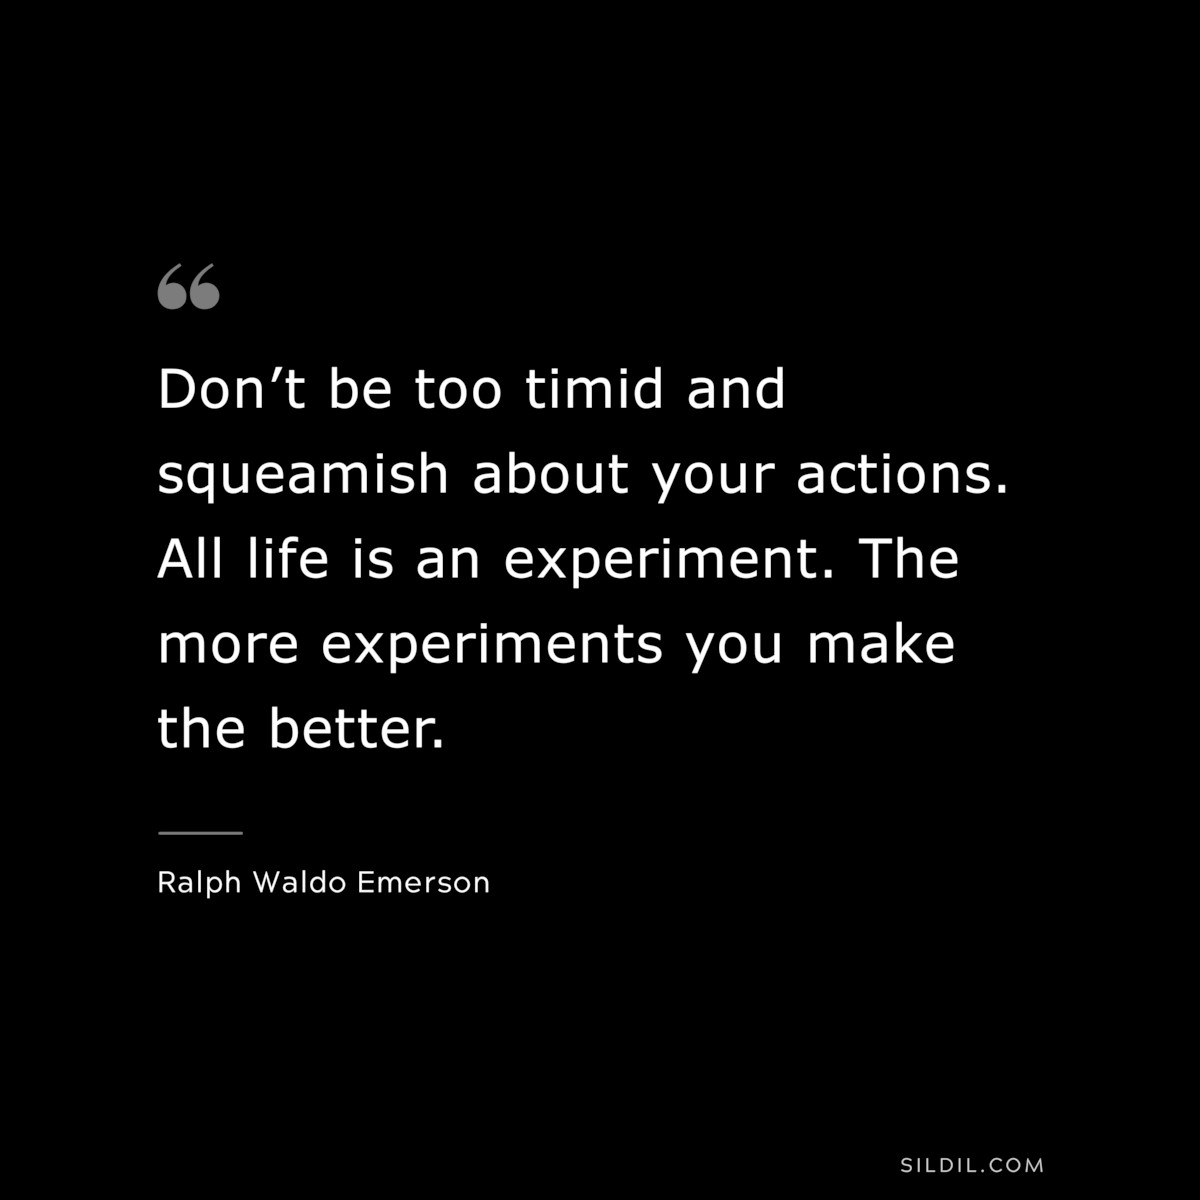 Don’t be too timid and squeamish about your actions. All life is an experiment. The more experiments you make the better. — Ralph Waldo Emerson